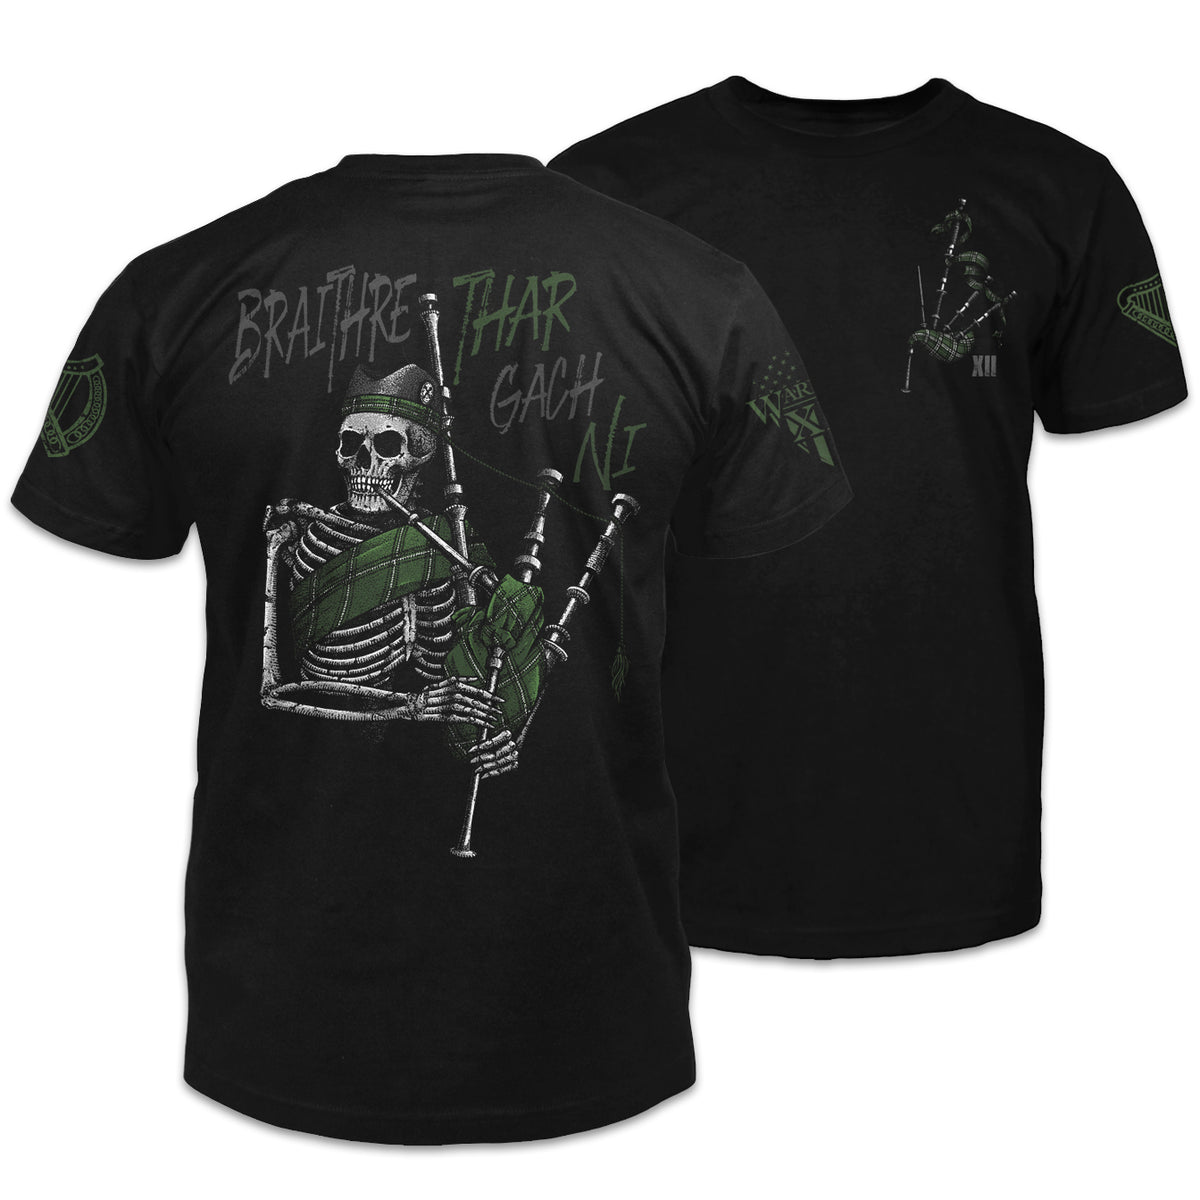 Front and back black t-shirt with the words "Braithre Thar Gach Ni", meaning "Brotherhood Before All" in Gaelic and a skeleton playing the bagpipes printed on the back of the shirt. 